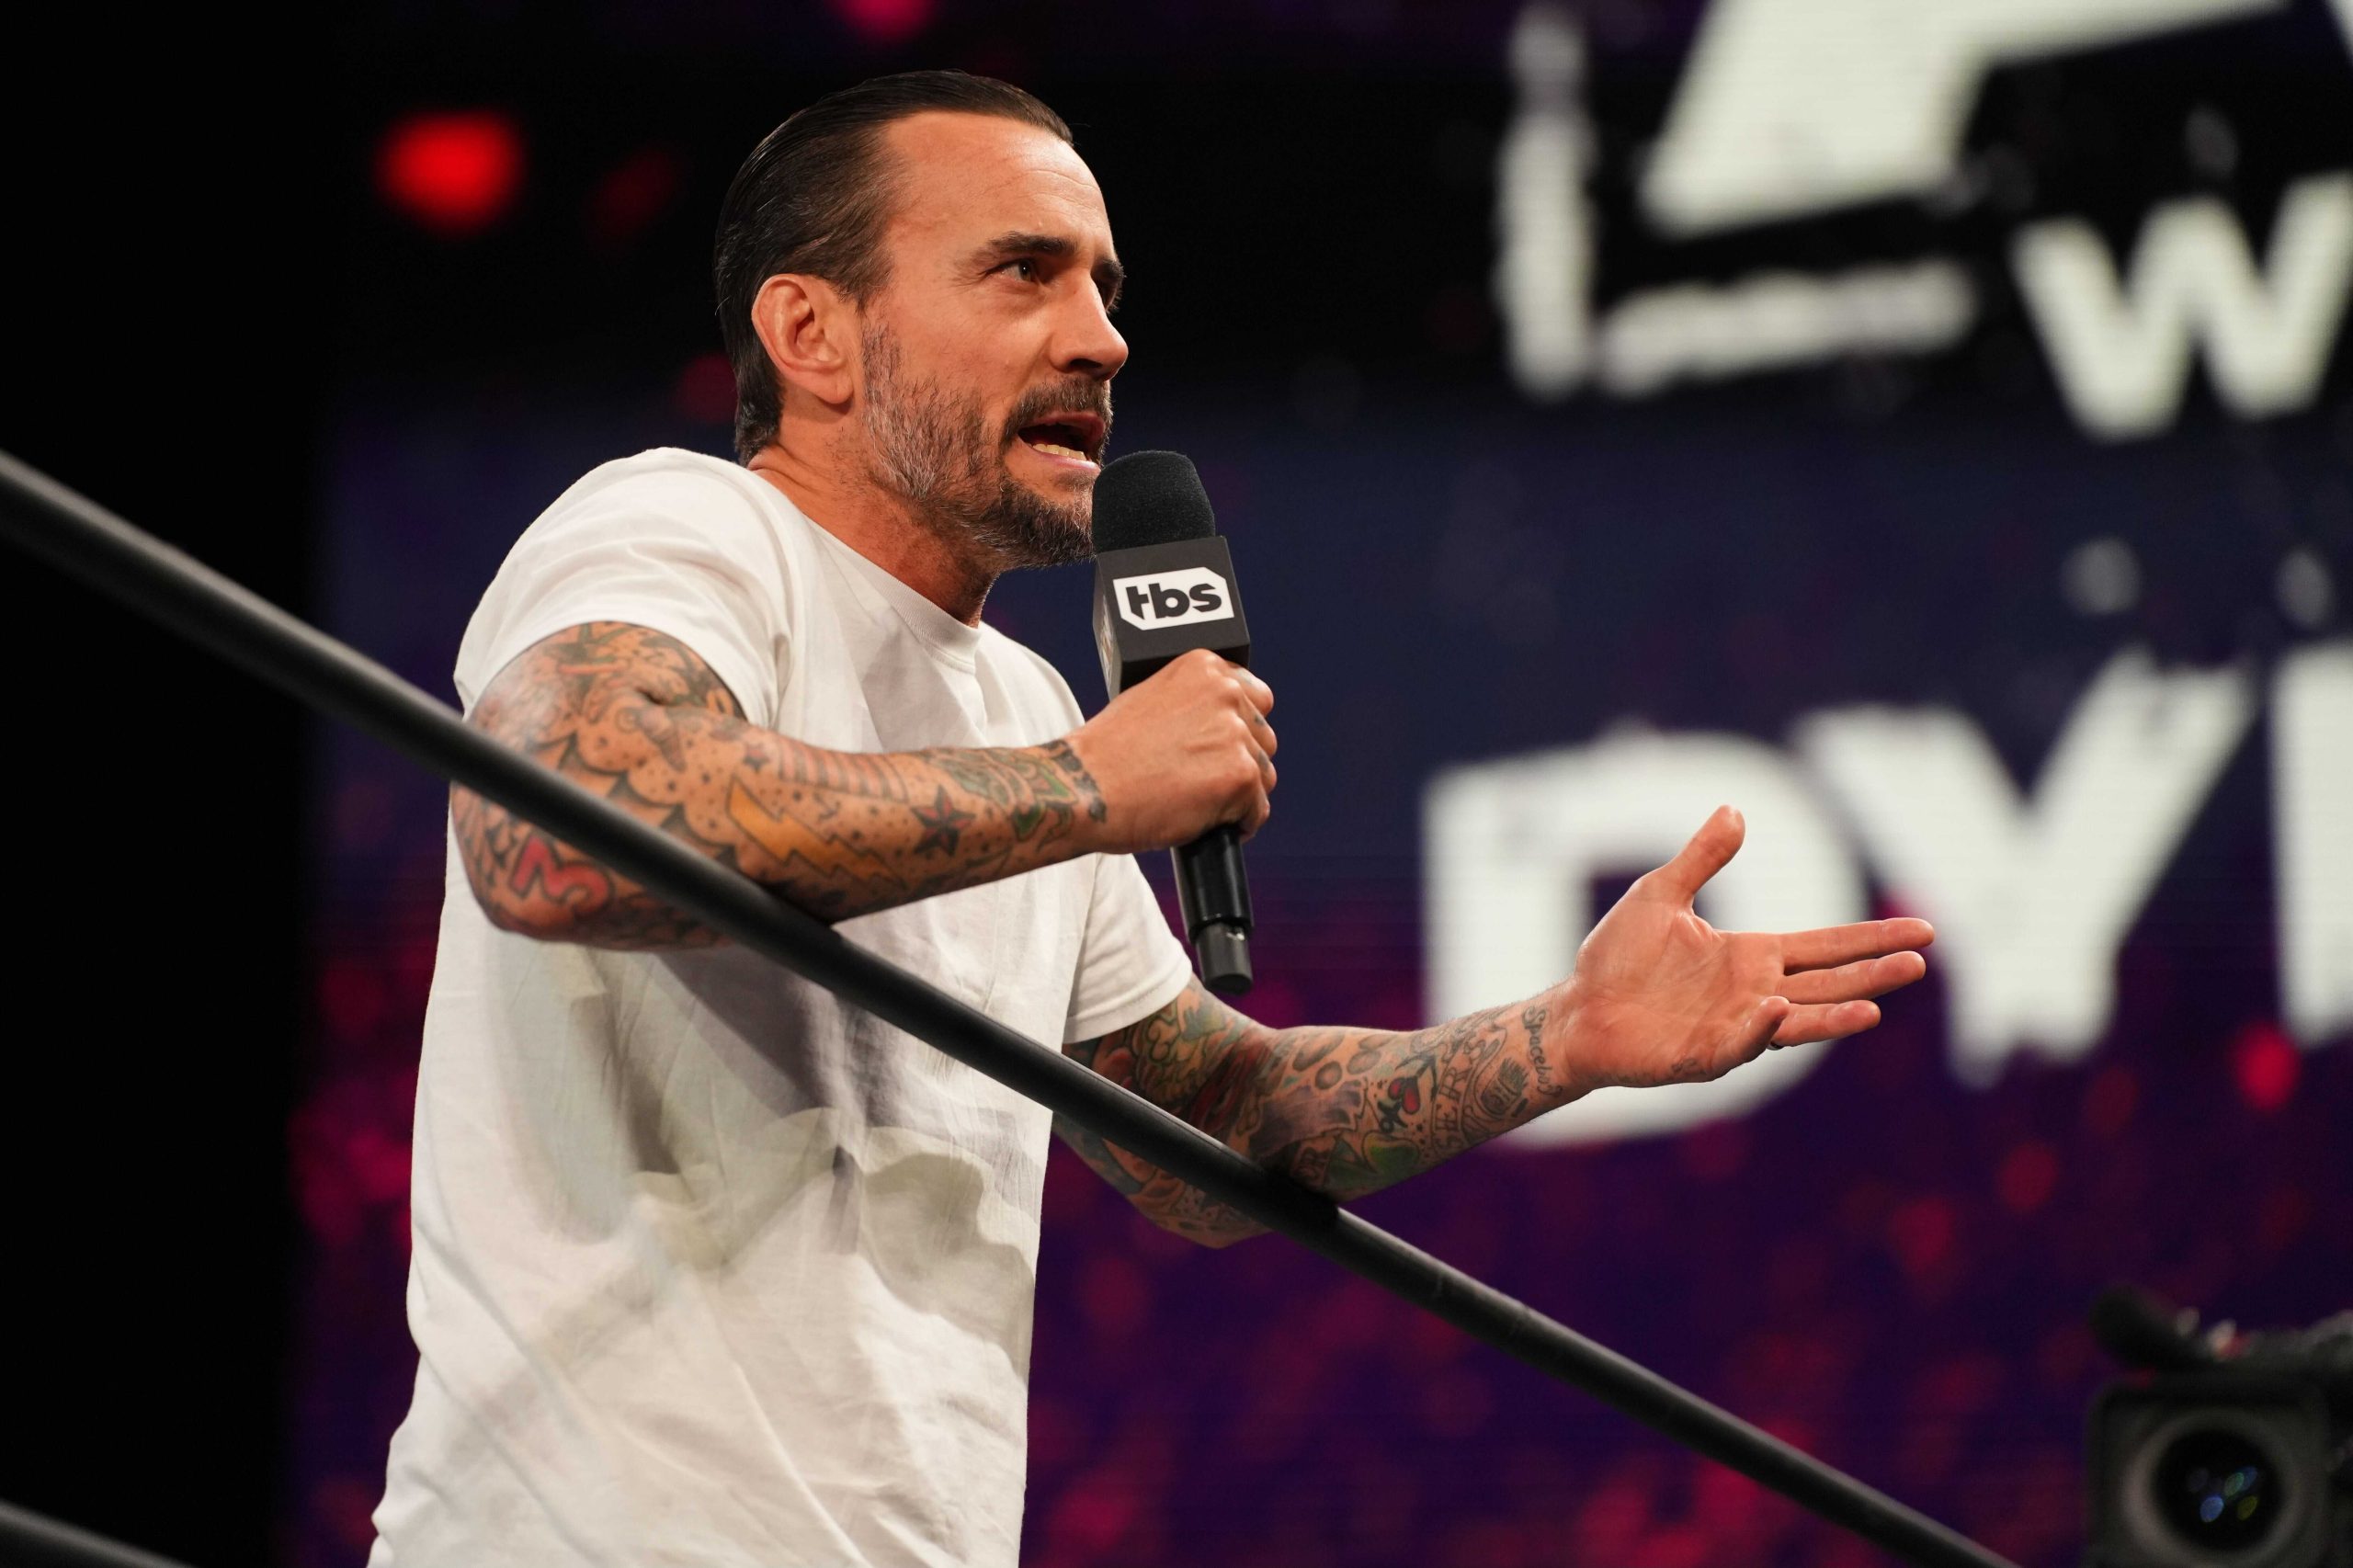 CM Punk on March 2, 2022 episode of AEW Dynamite